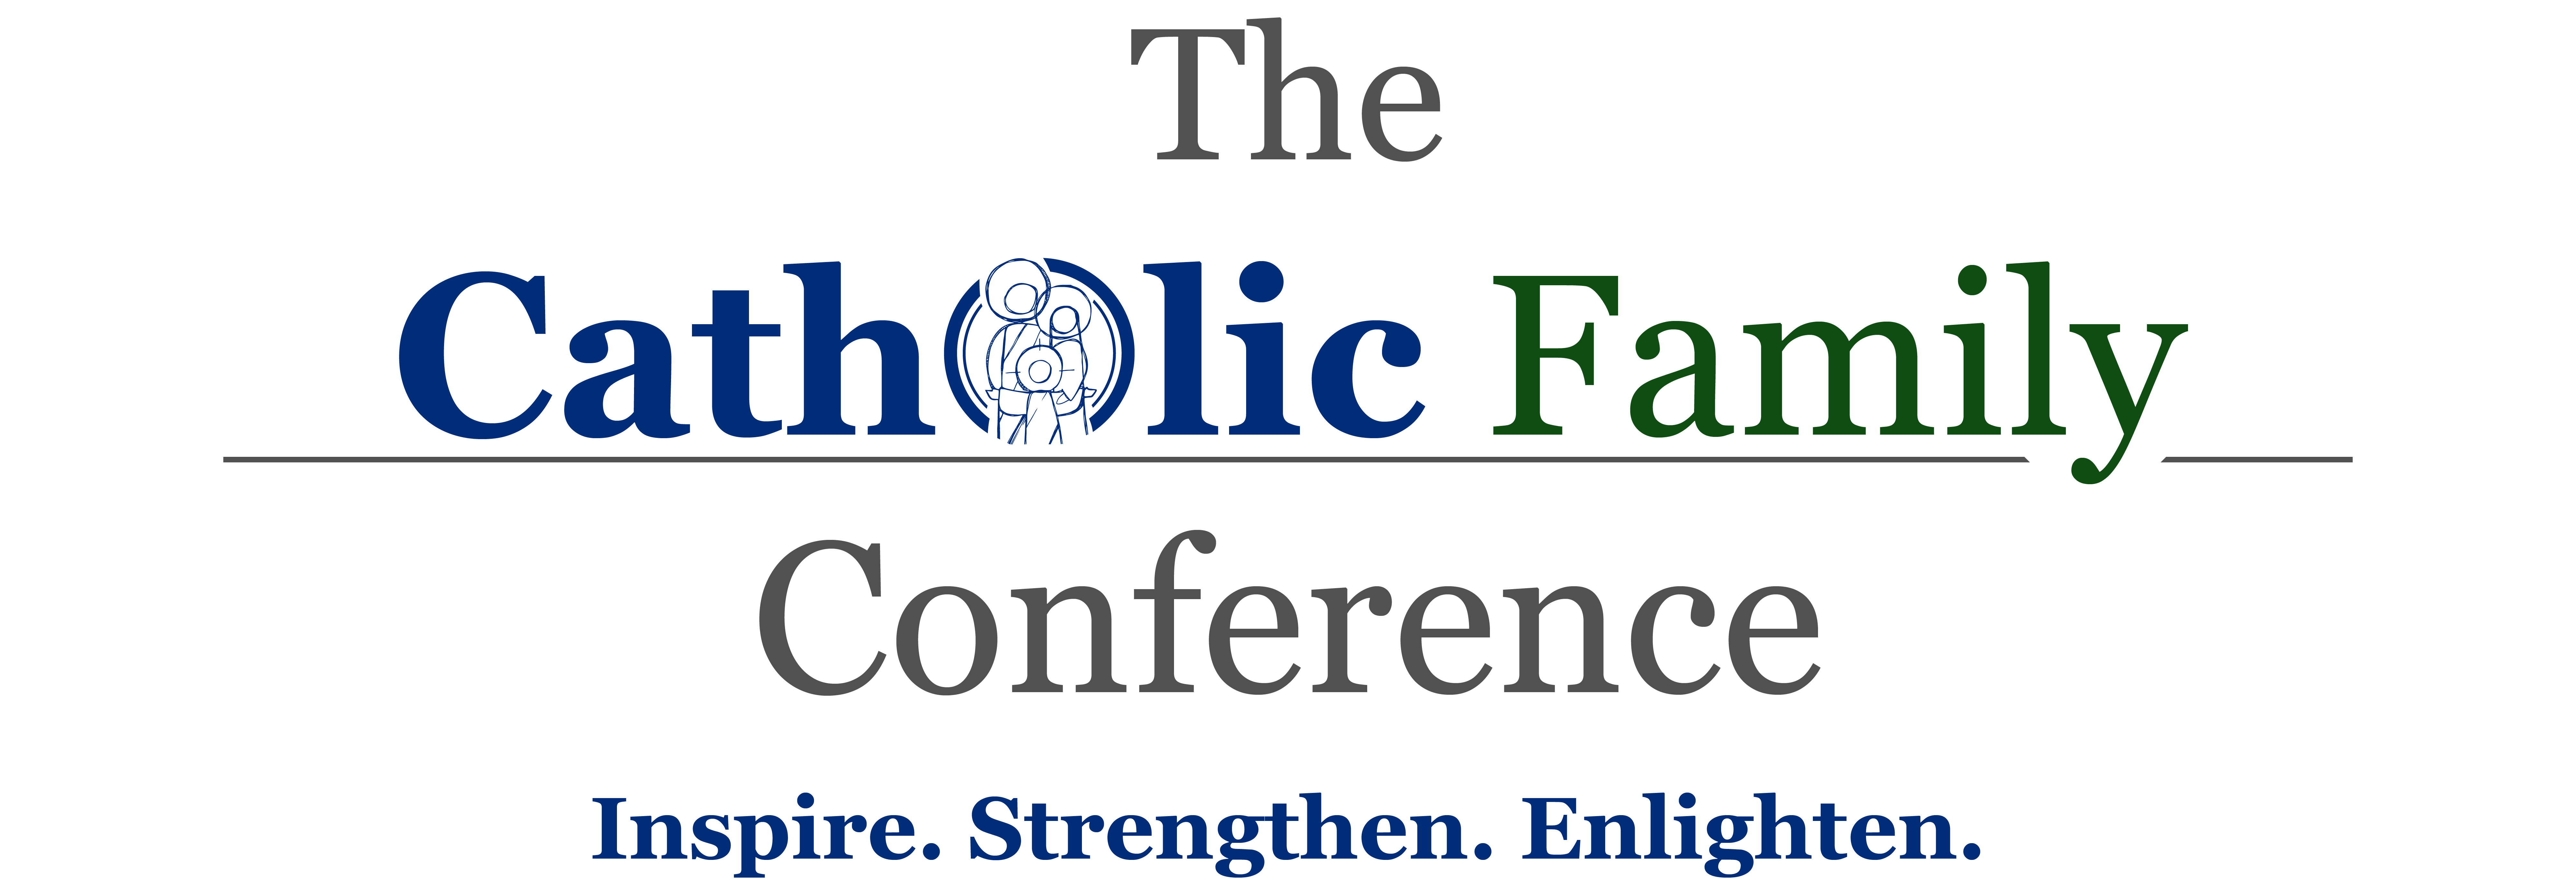 Catholic Family Conference Crowdcast